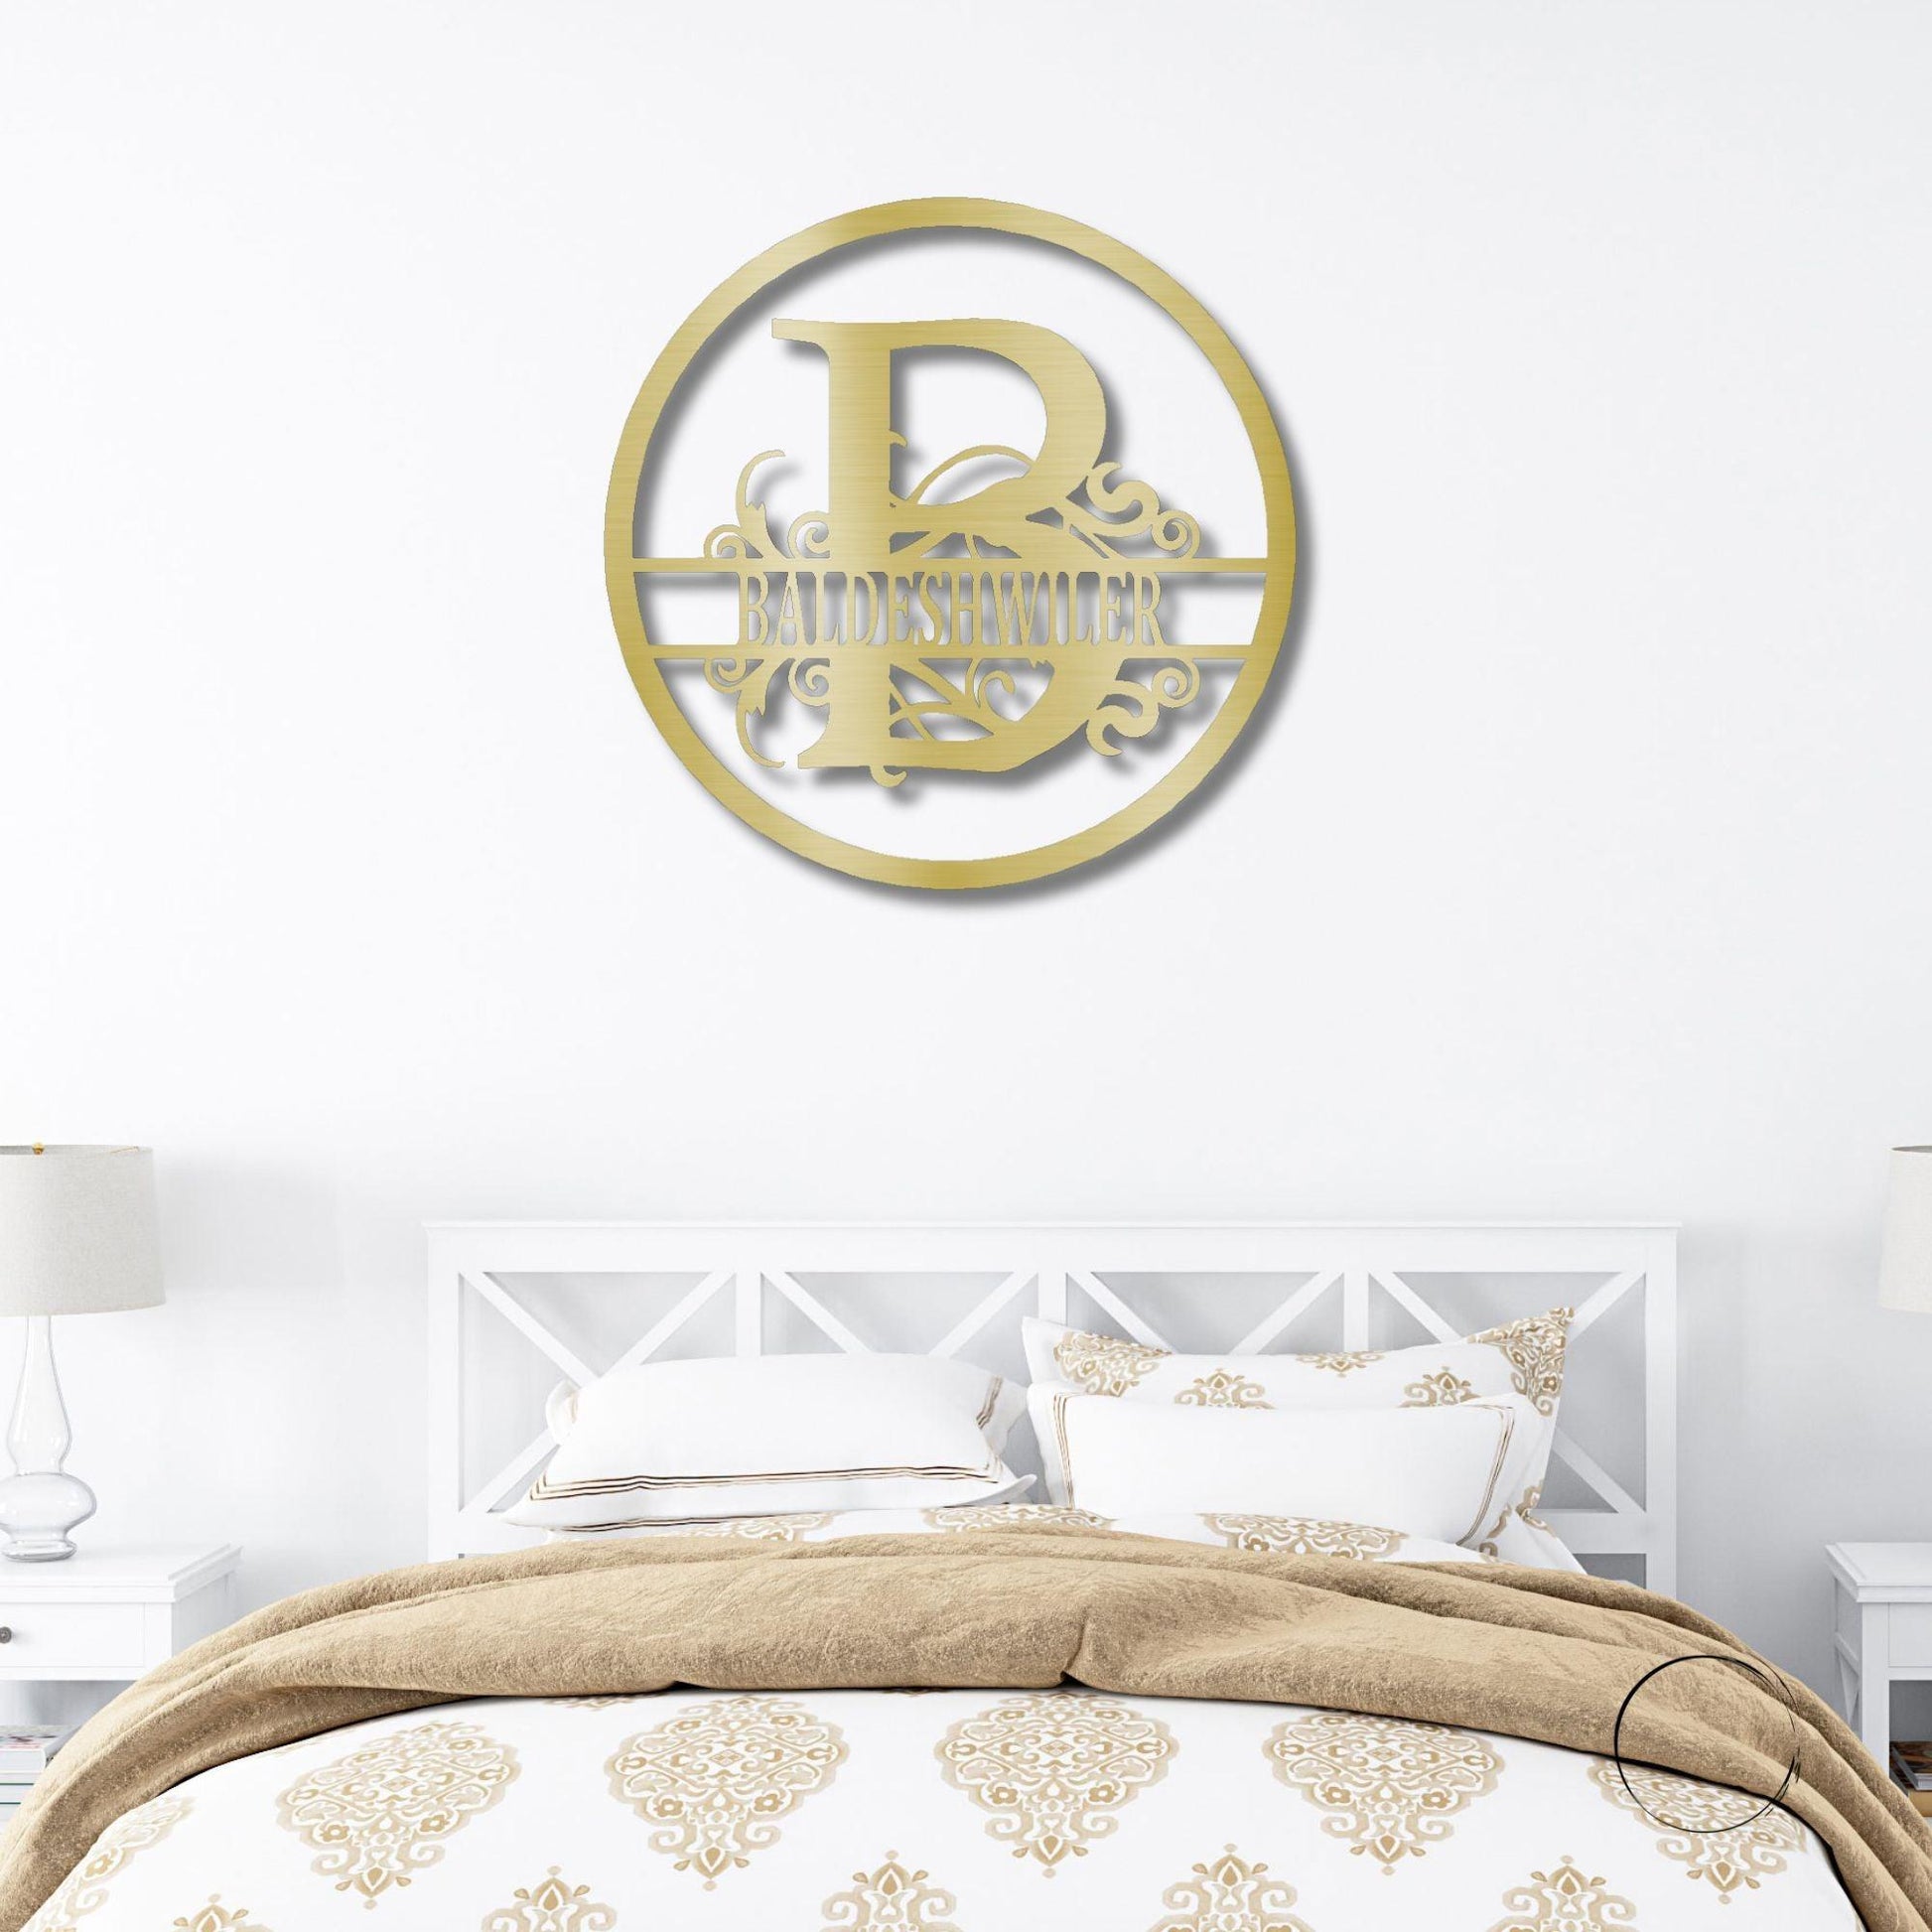 Monogrammed Elegance: Your Initial, Your Name, Your Style - Steel Wall Sign Art - Mallard Moon Gift Shop